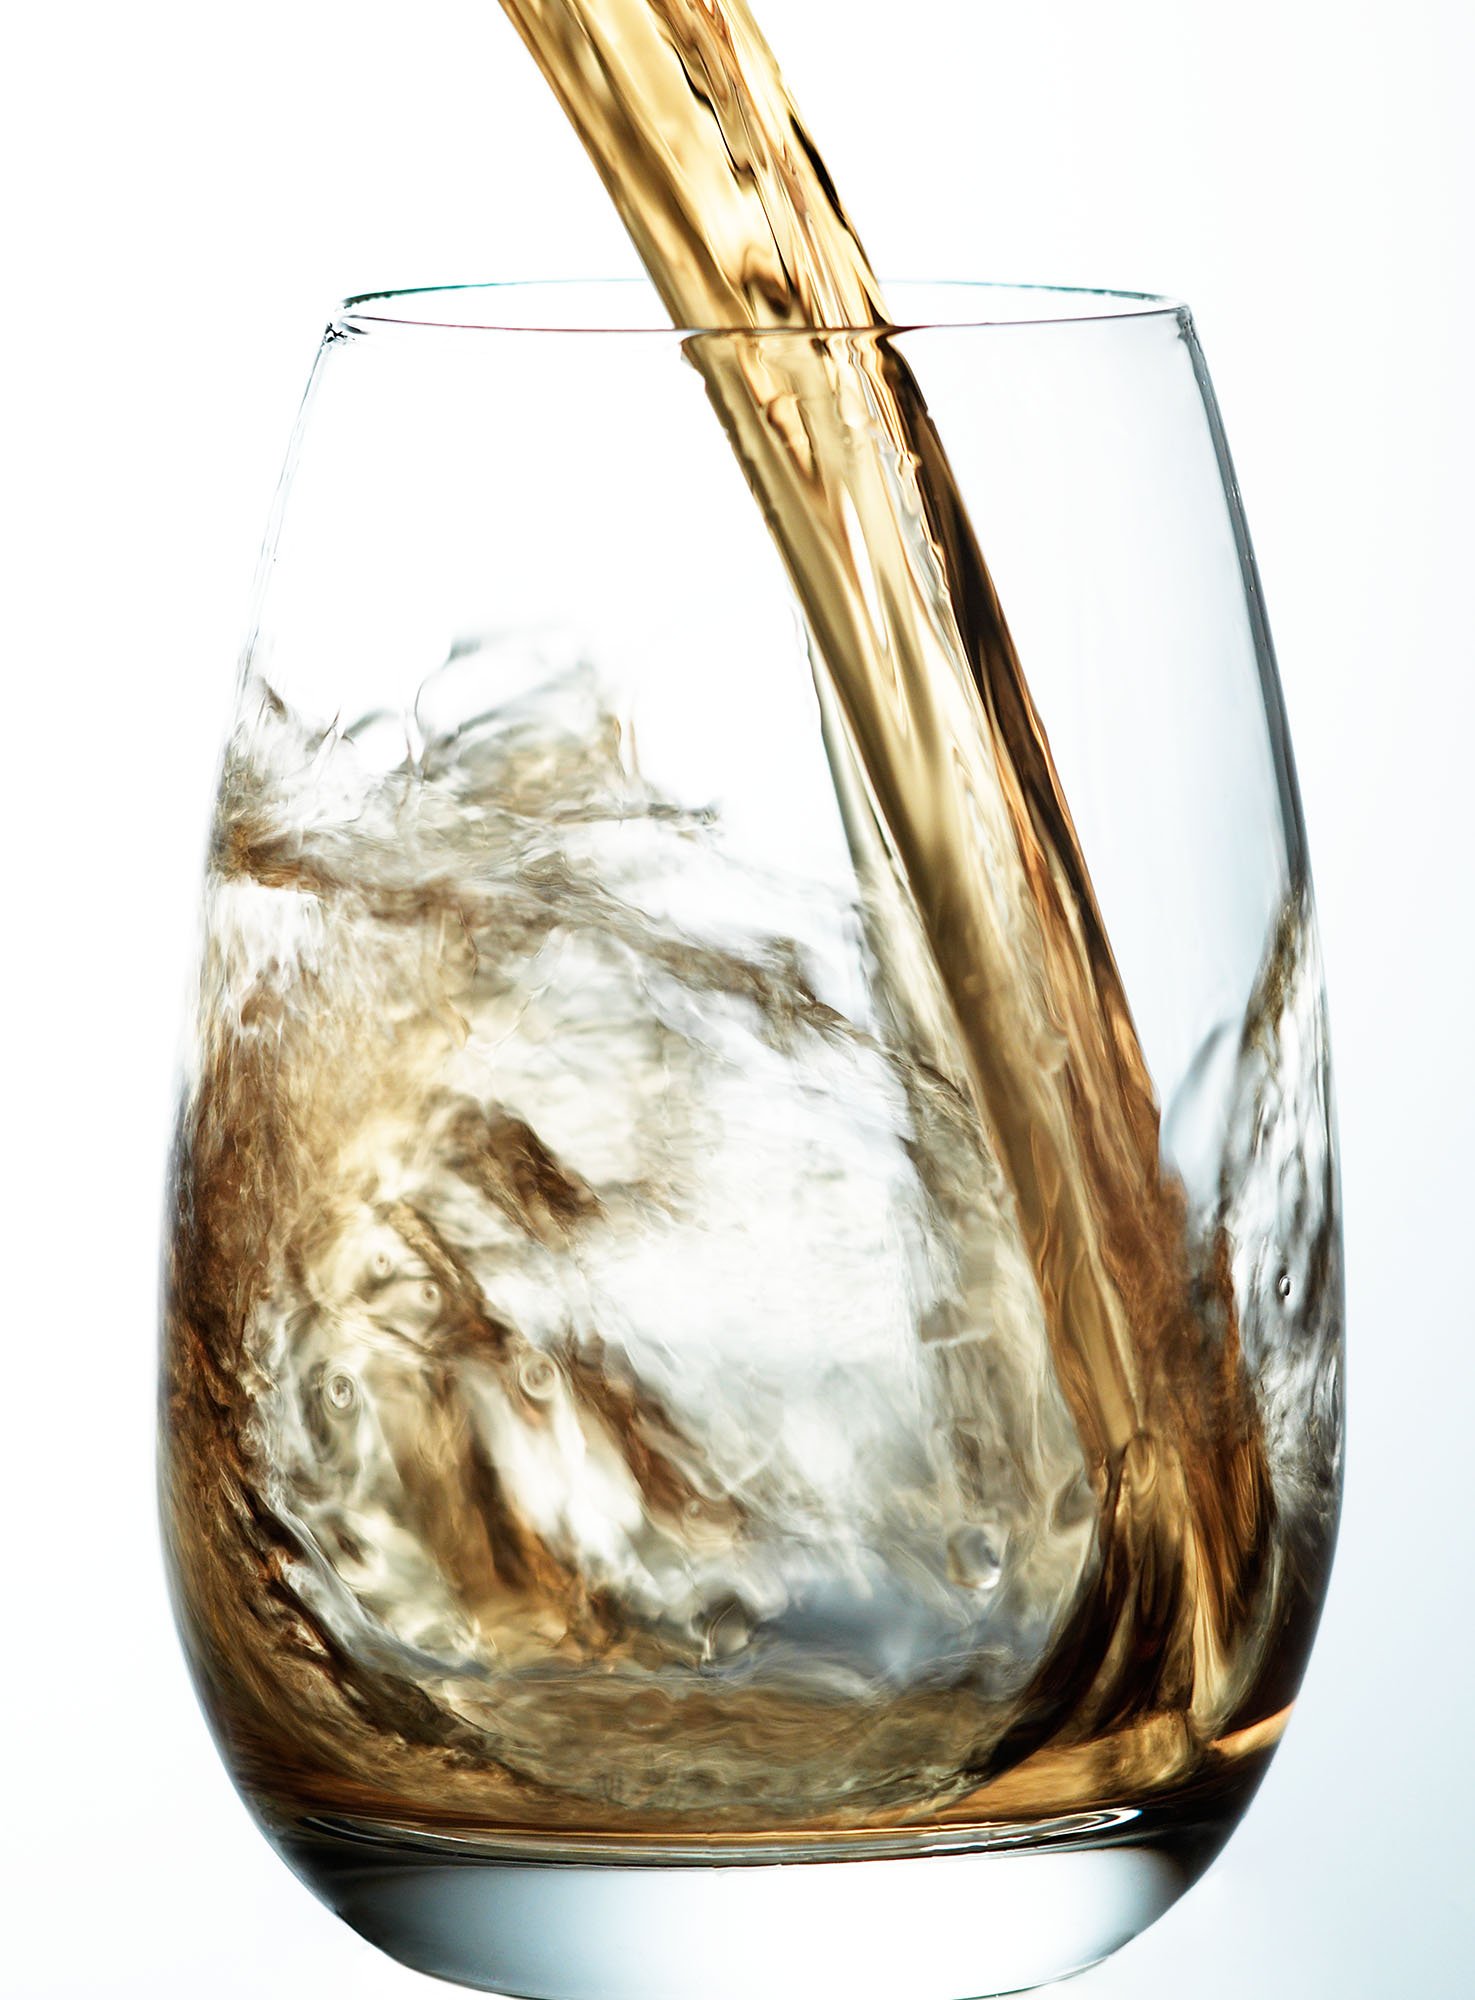 whisky pour slow.jpg